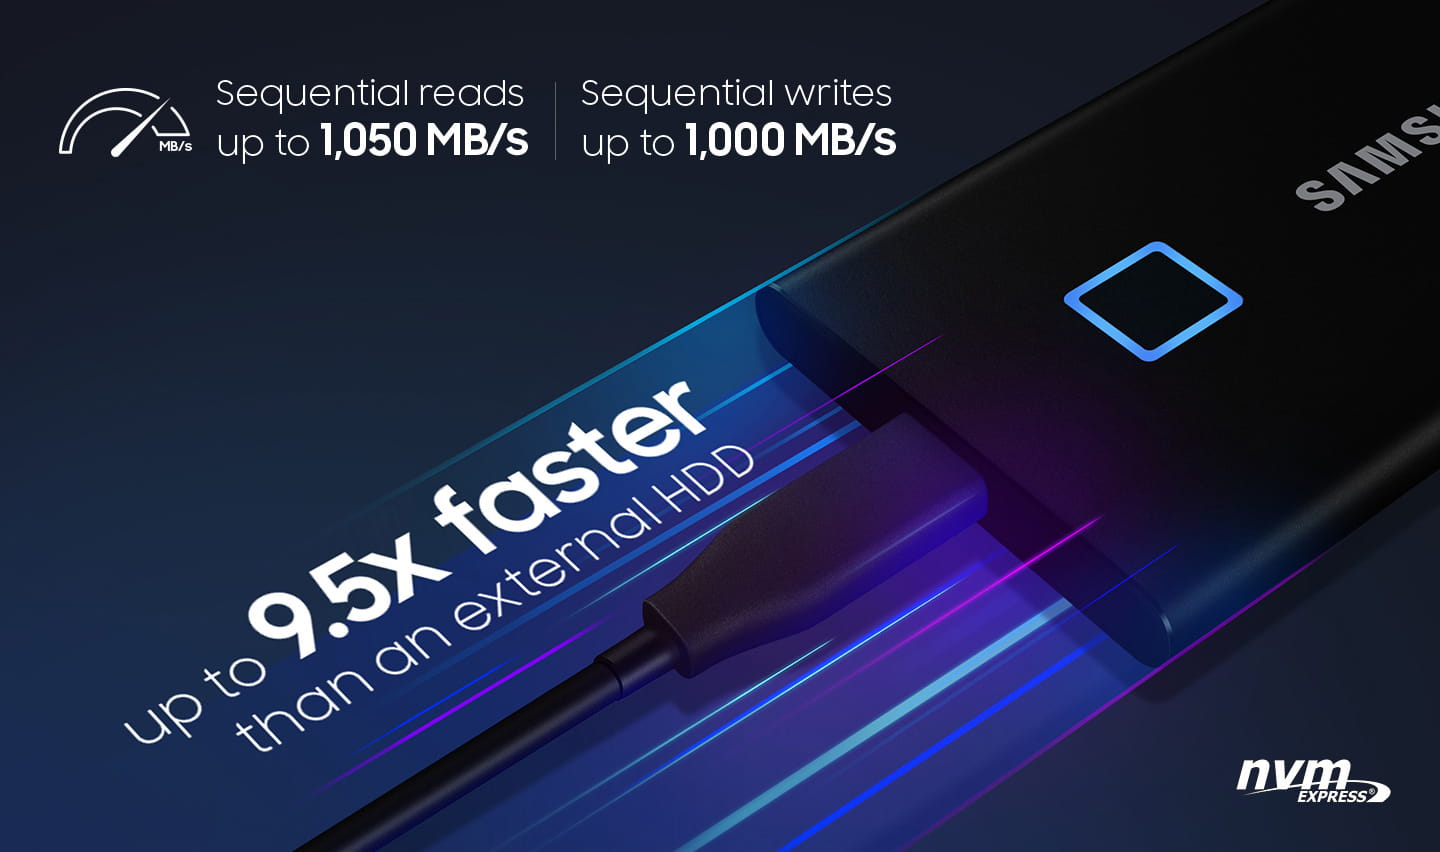  Samsung Portable SSD T7 Touch has sequential reads up to 1,050 MB/s and sequential writes up to 1,000 MB/s, which is up to 9.5x faster than an external HDD.